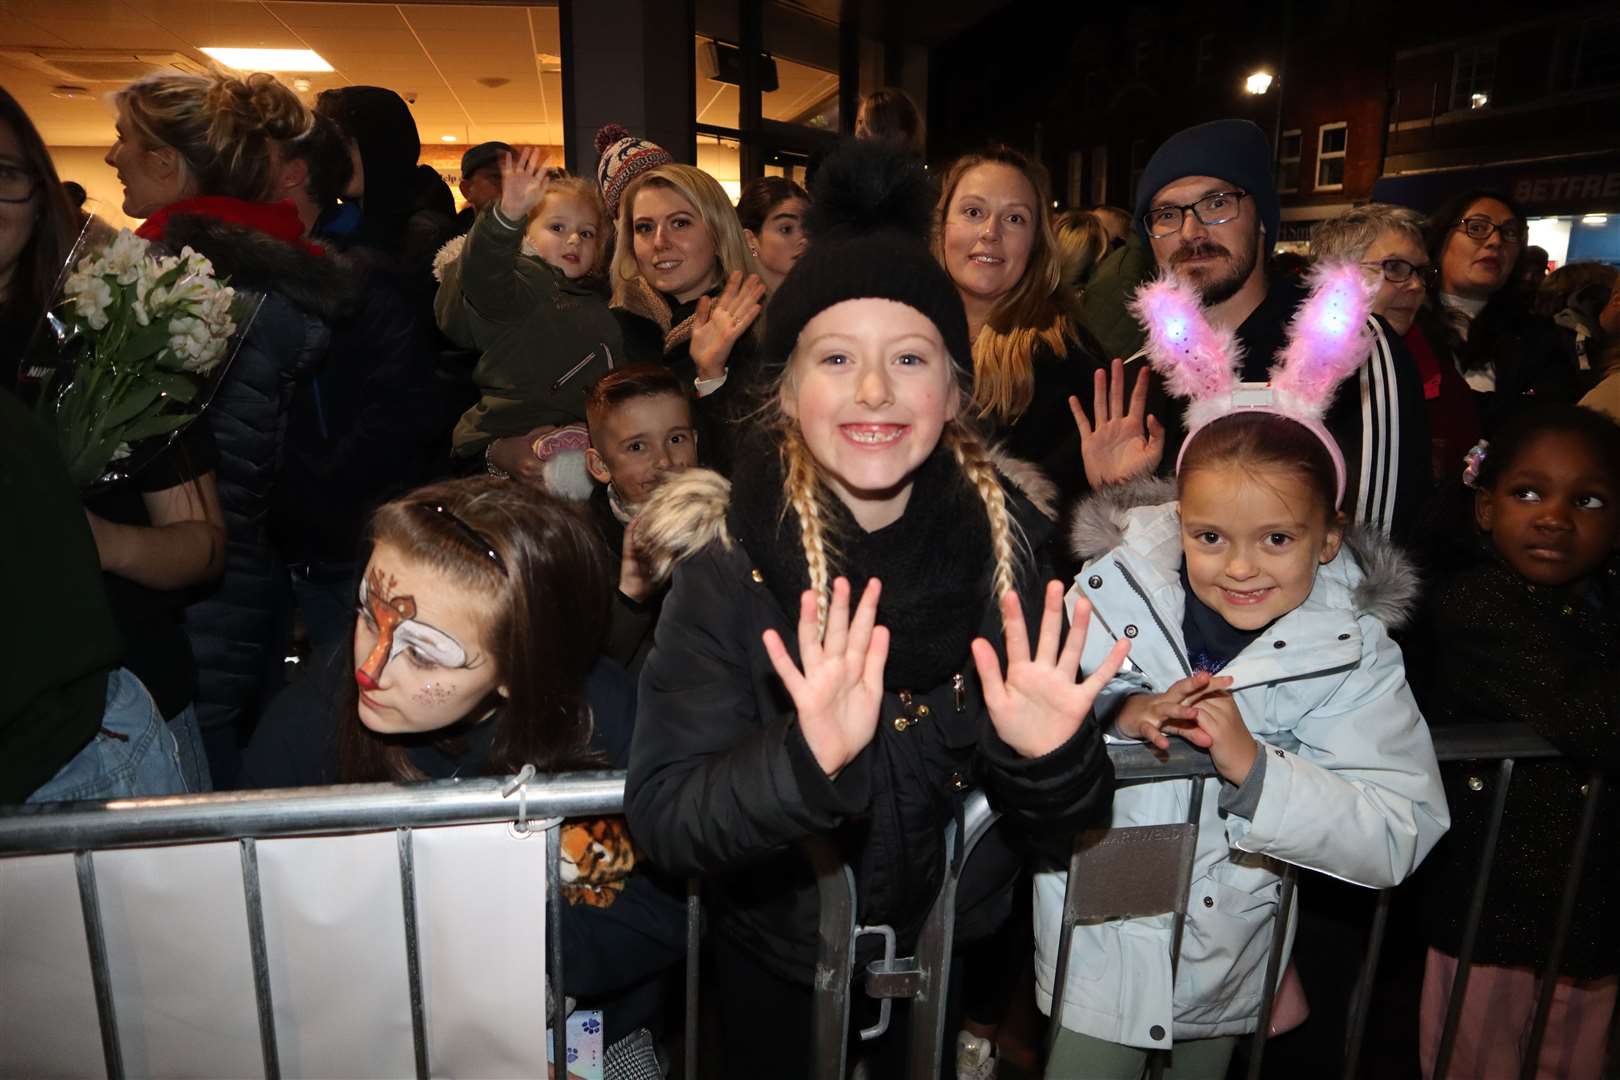 Some of the crowd watching arena acts at the Sittingbourne Christmas lights switch-on